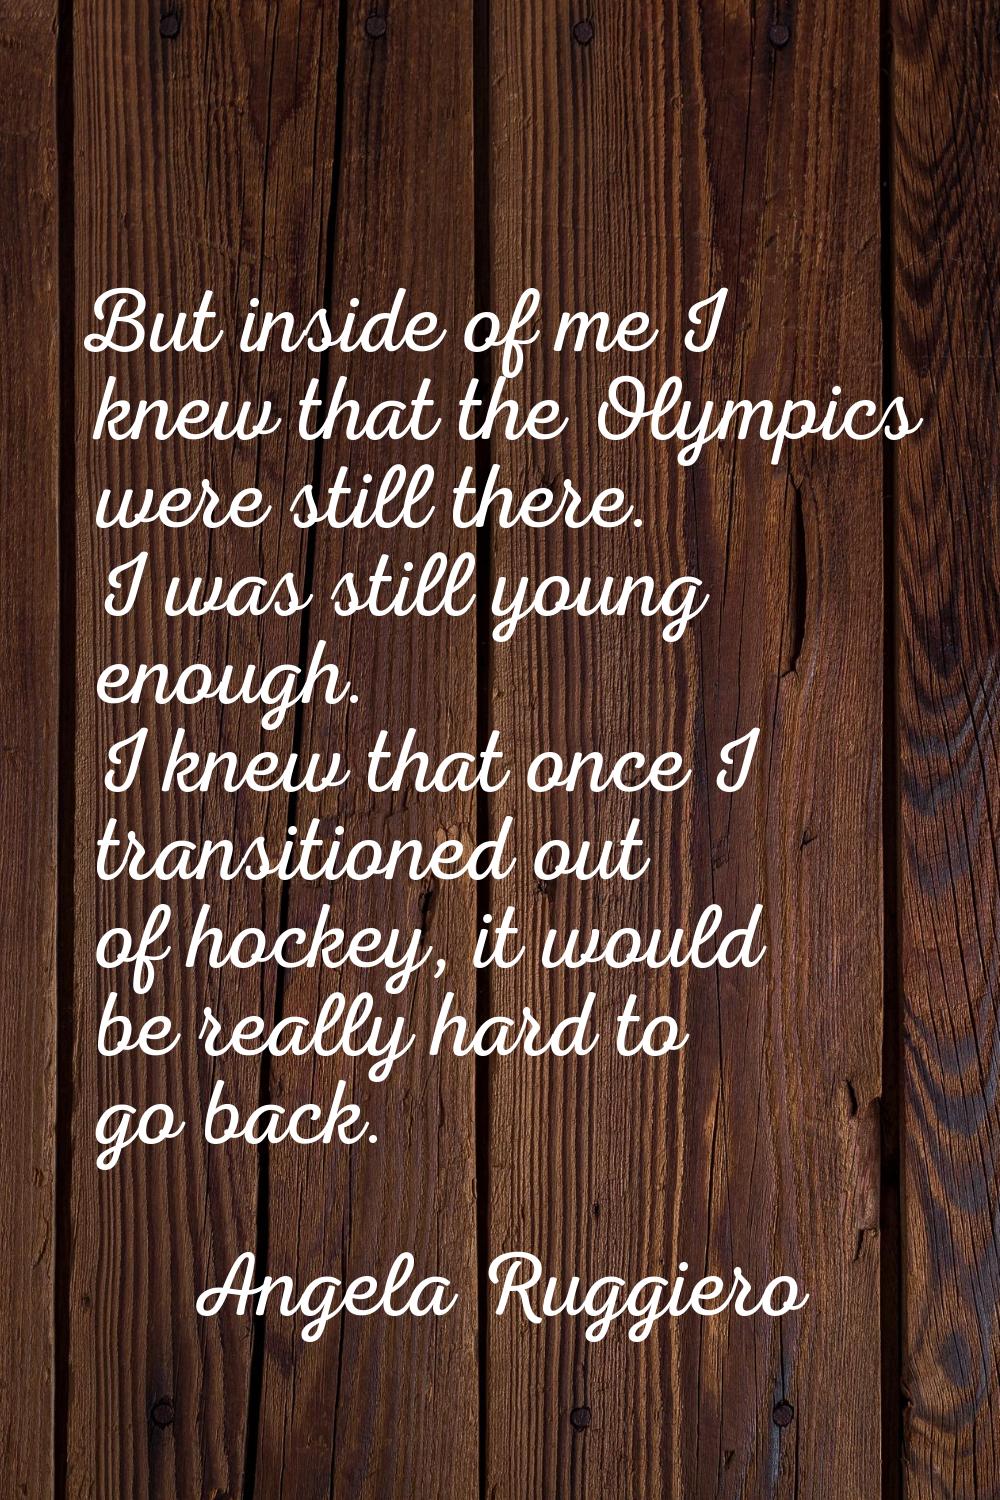 But inside of me I knew that the Olympics were still there. I was still young enough. I knew that o